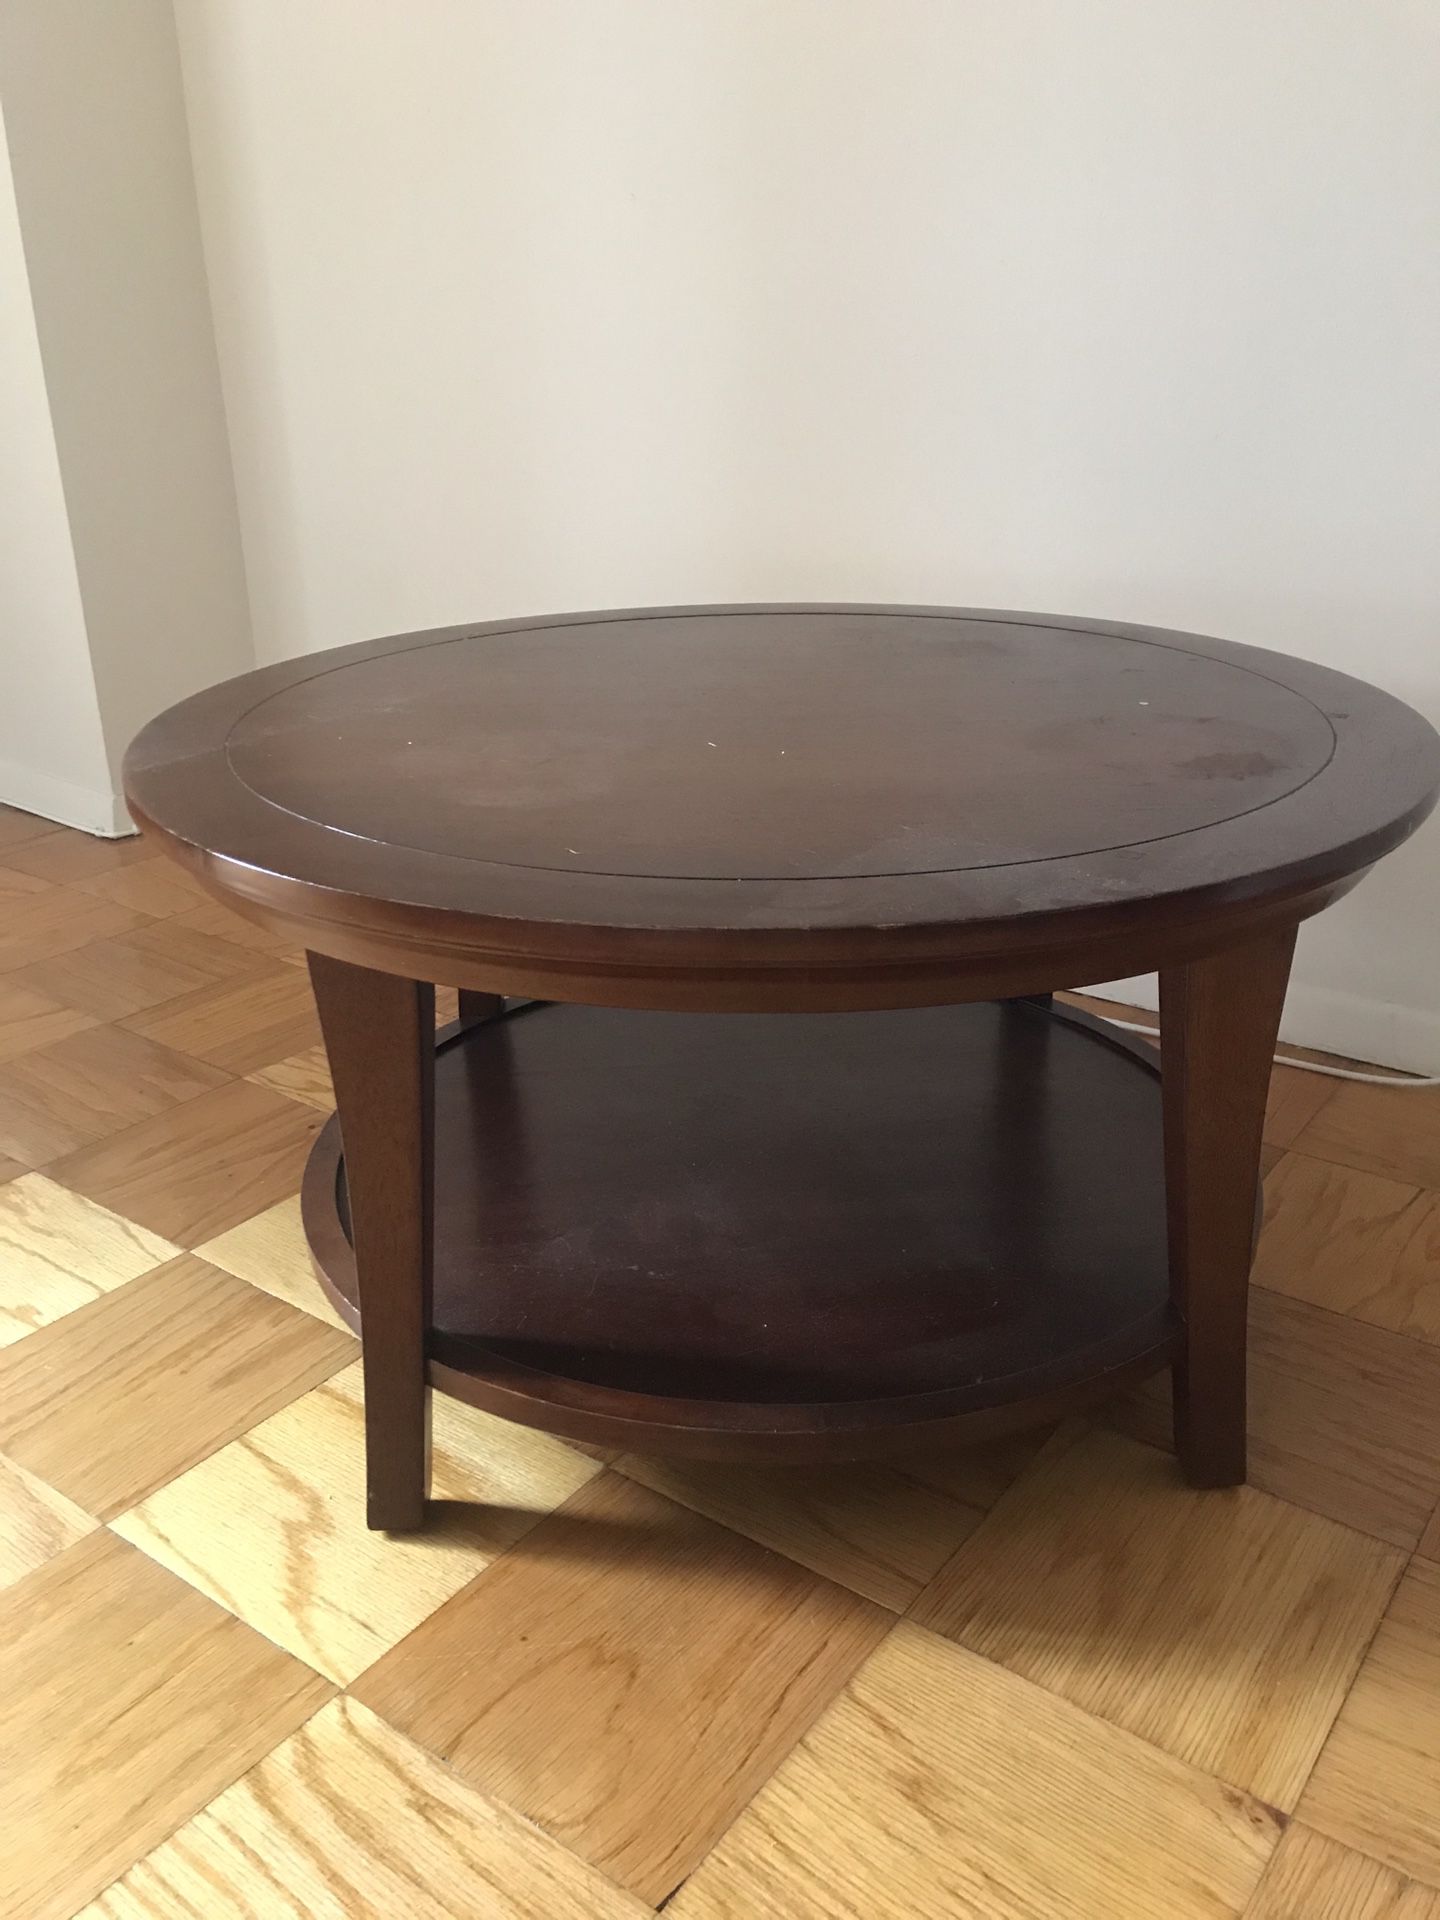 Coffee table, free, moving out